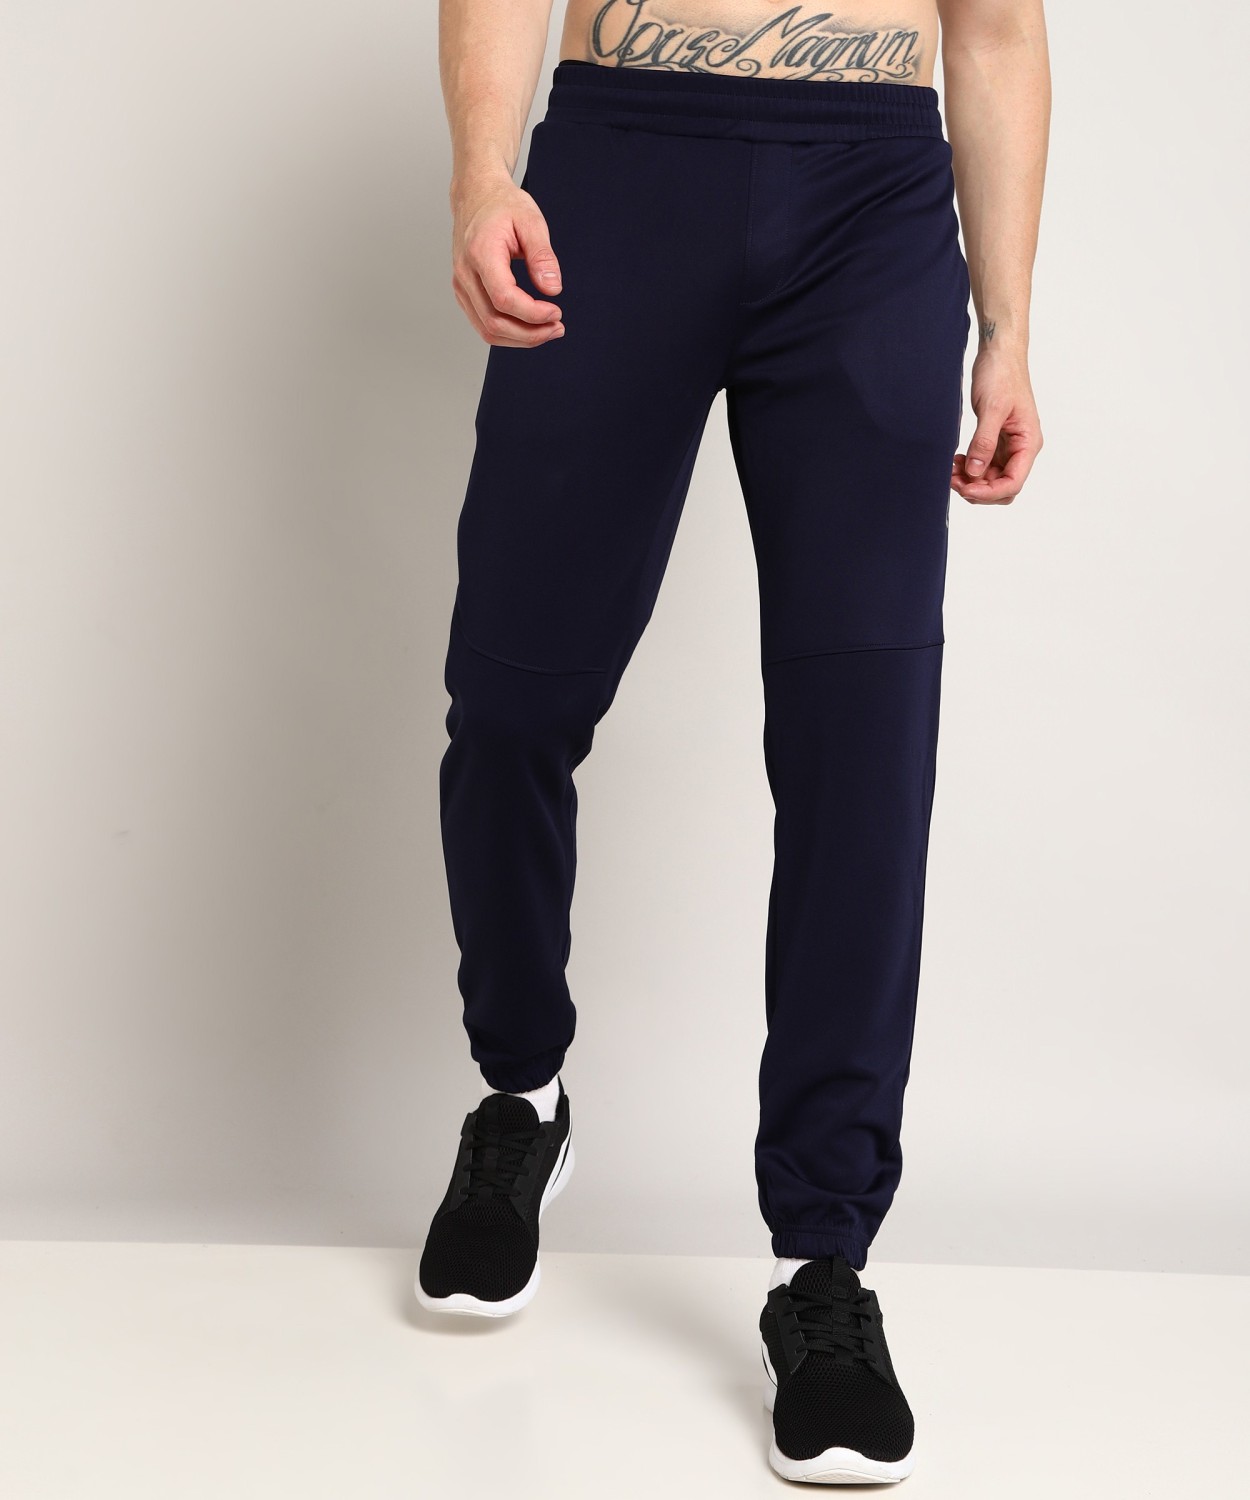 Prowl by Tiger Shroff Men's Joggers (2900503_Olive_X-Large) : Amazon.in:  Clothing & Accessories